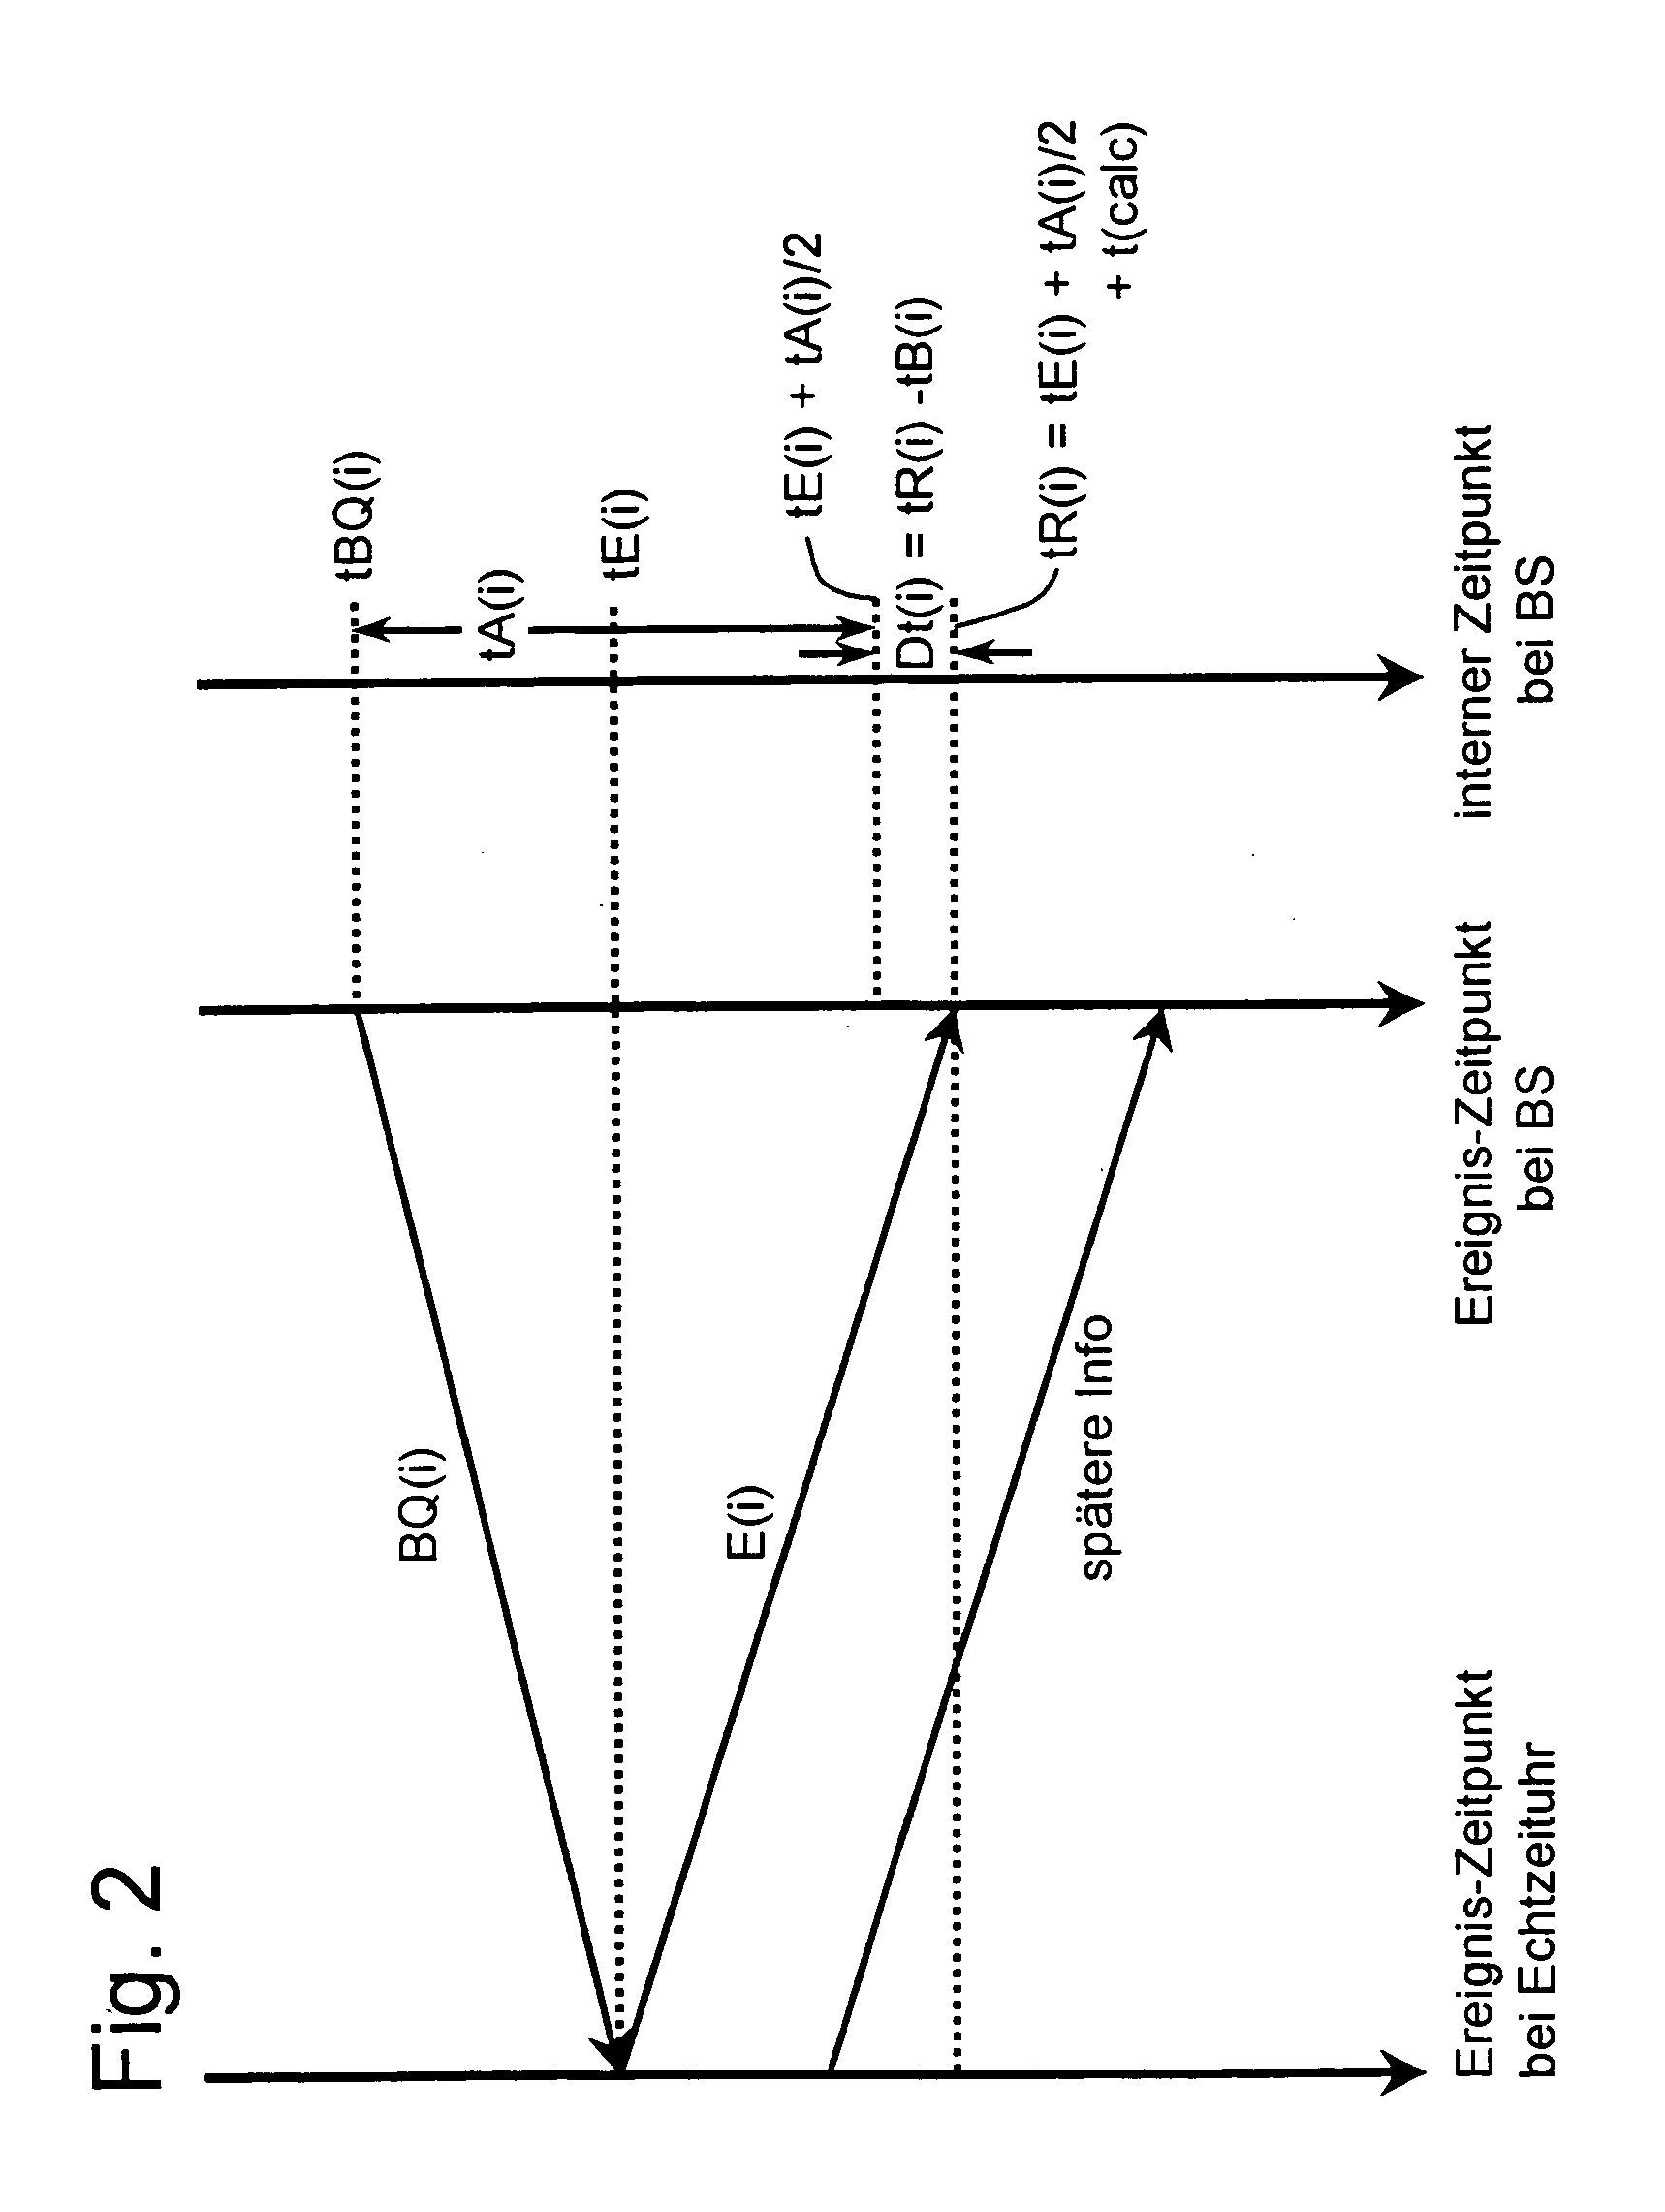 Synchronization method and system for clock signal sources, in particular in packet transmission communication systems